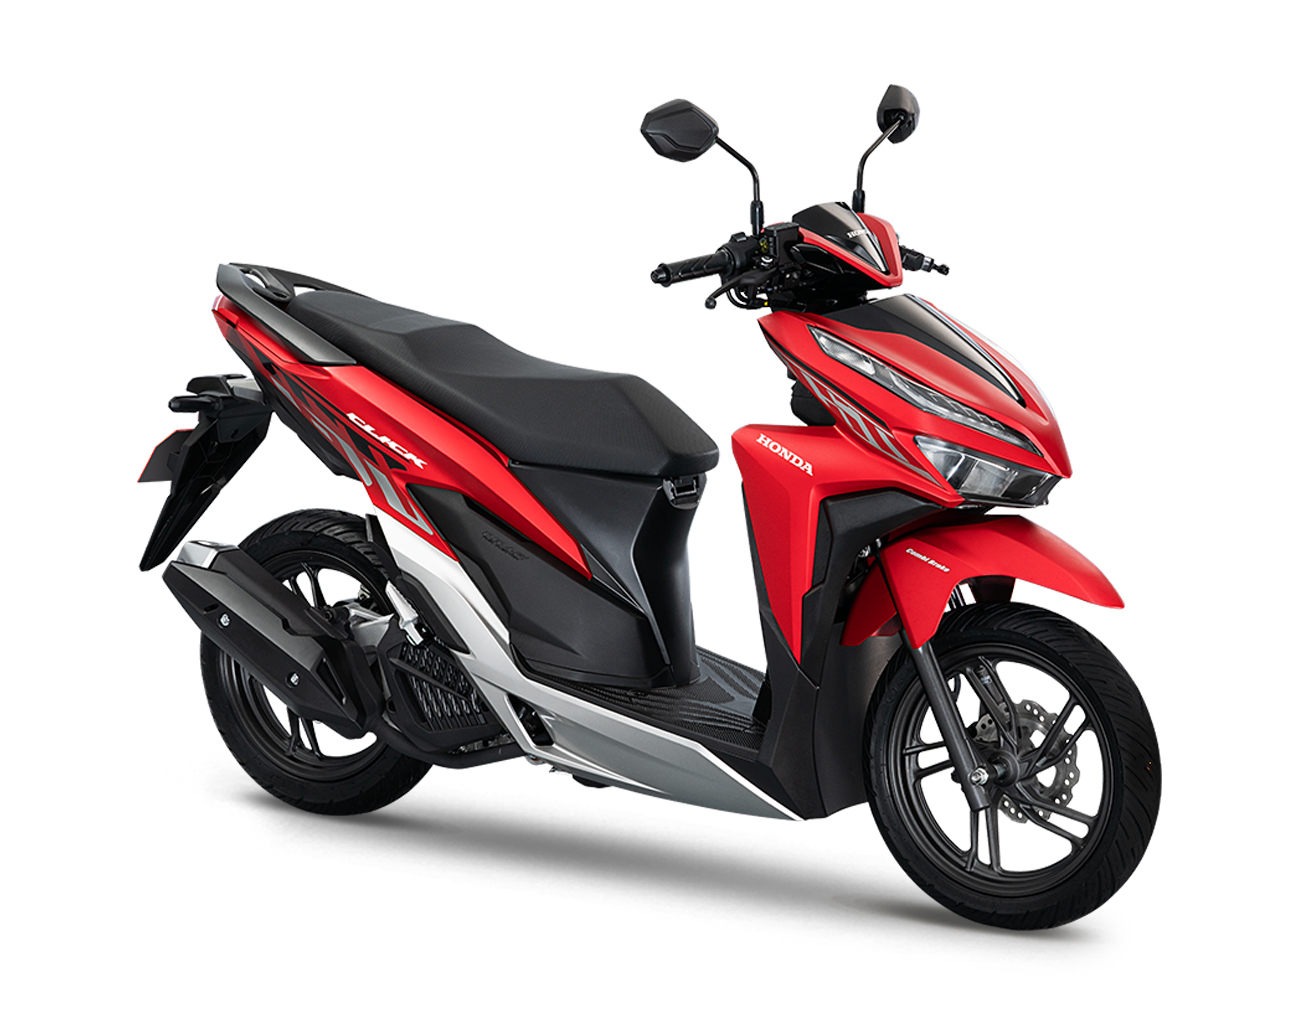 Honda CB500X Price Philippines, Downpayment & Monthly Payment